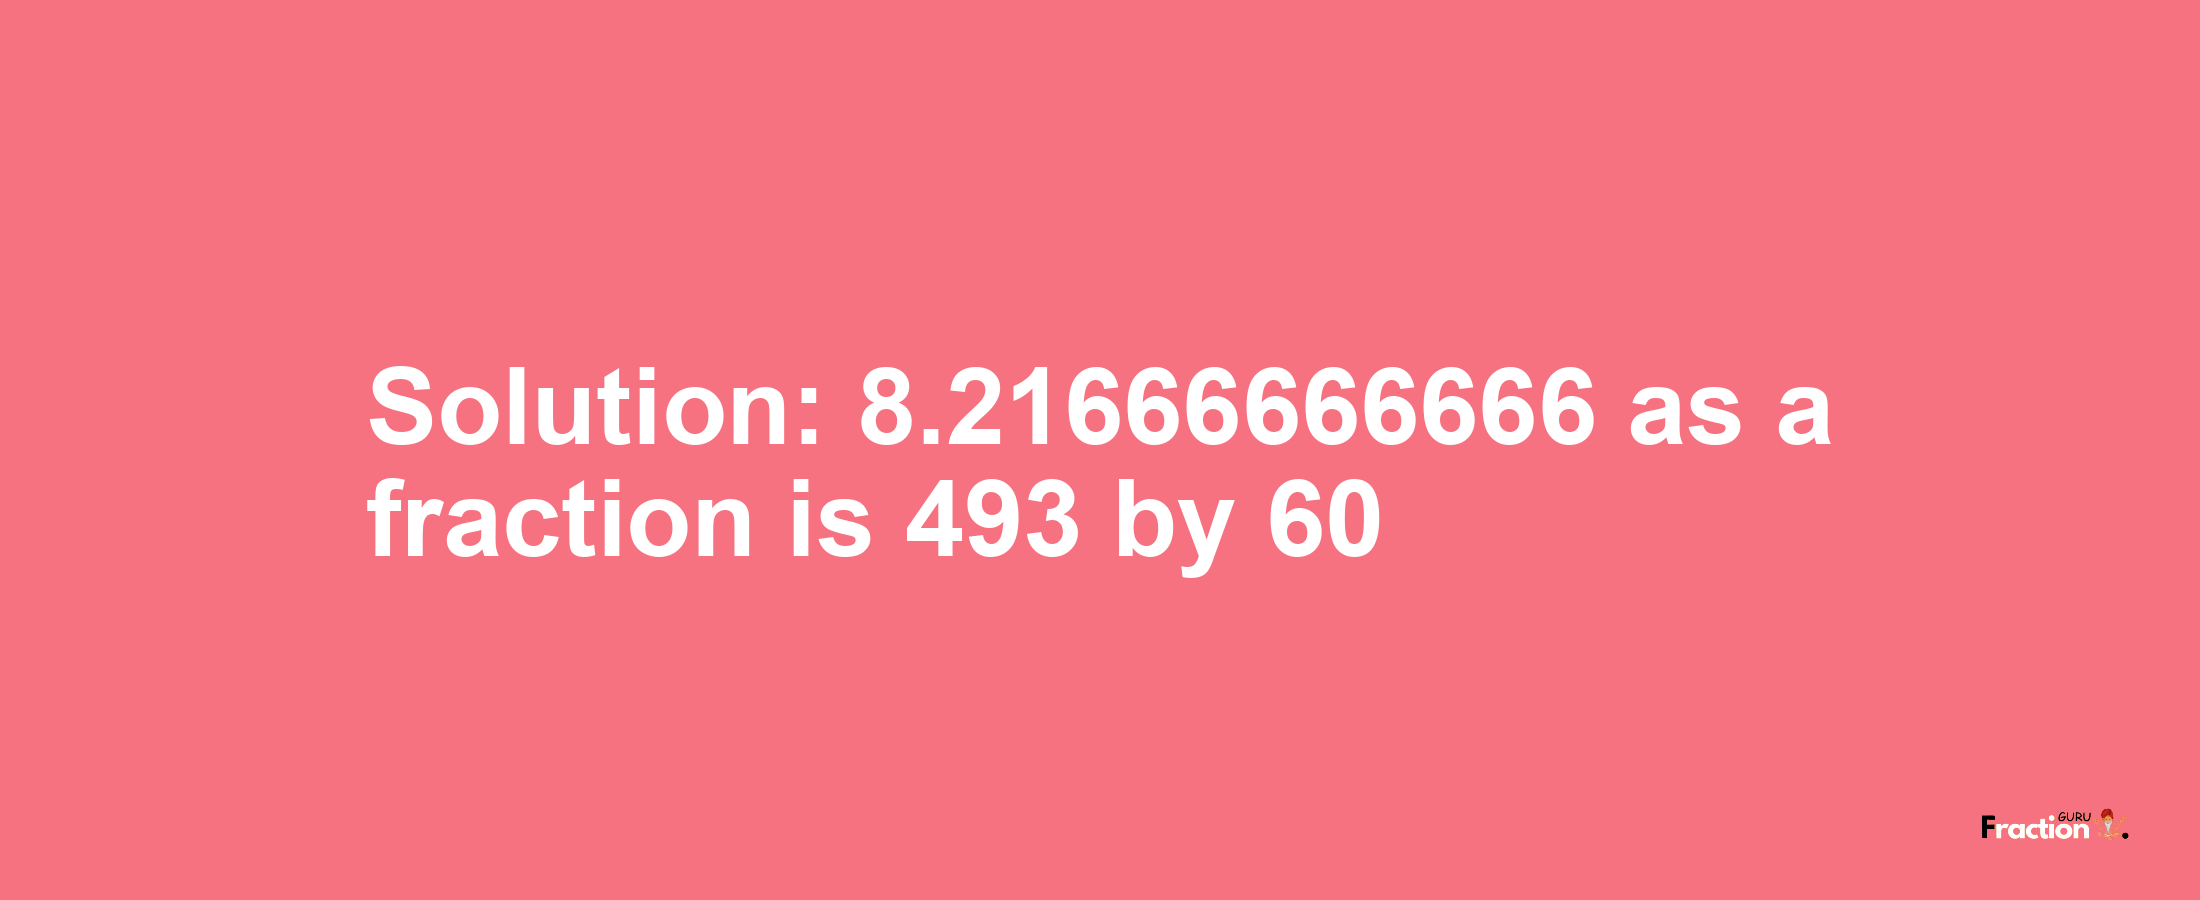 Solution:8.21666666666 as a fraction is 493/60